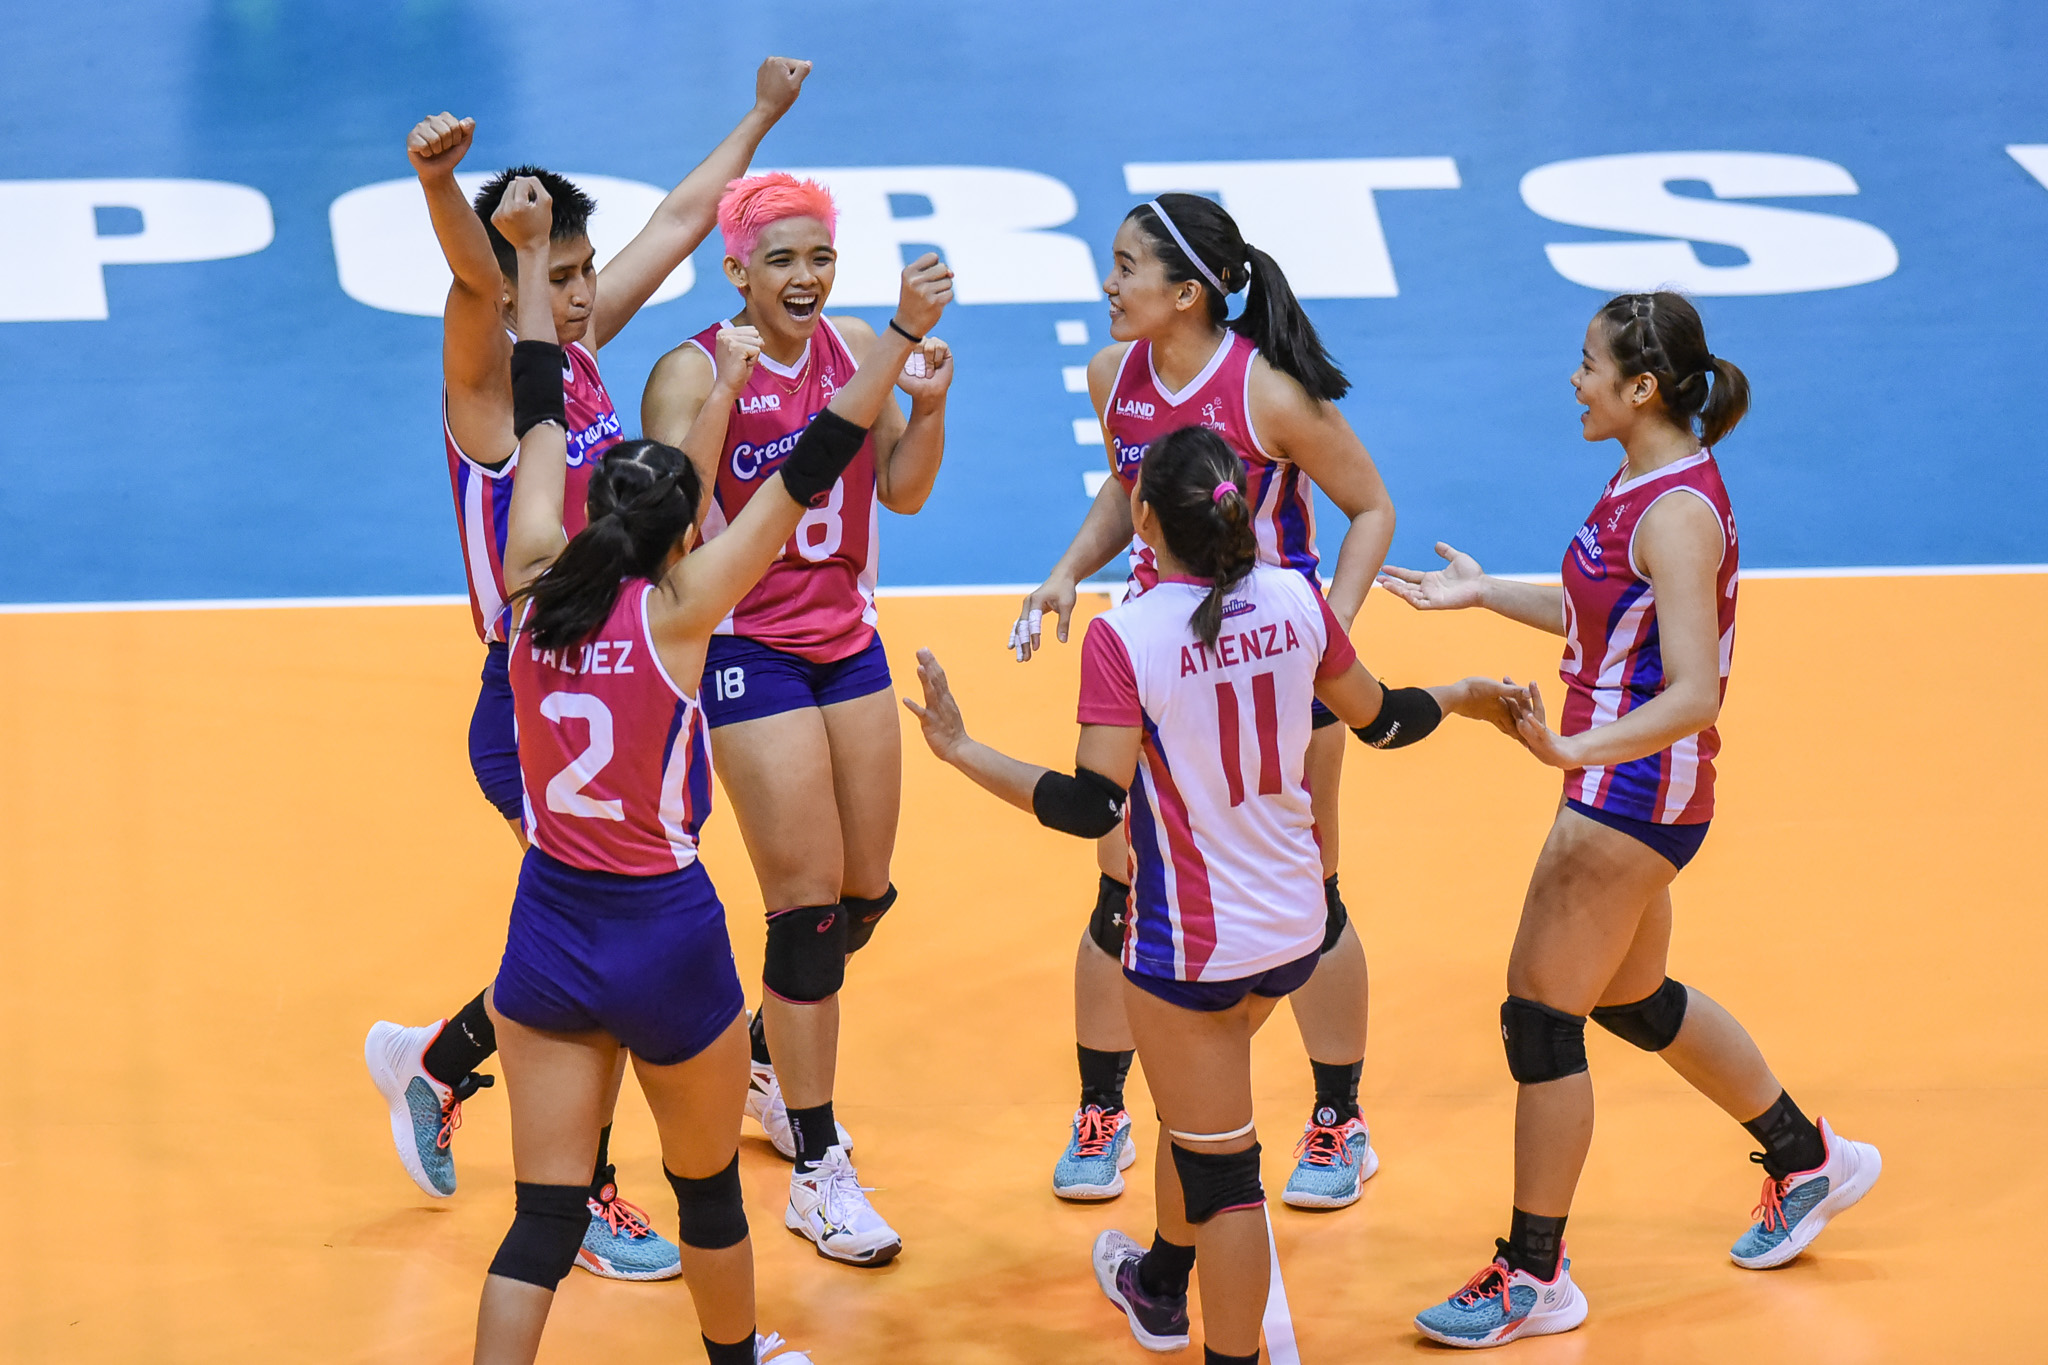 Tots Carlos leads Creamline anew in the PVL Invitationals semifinals.